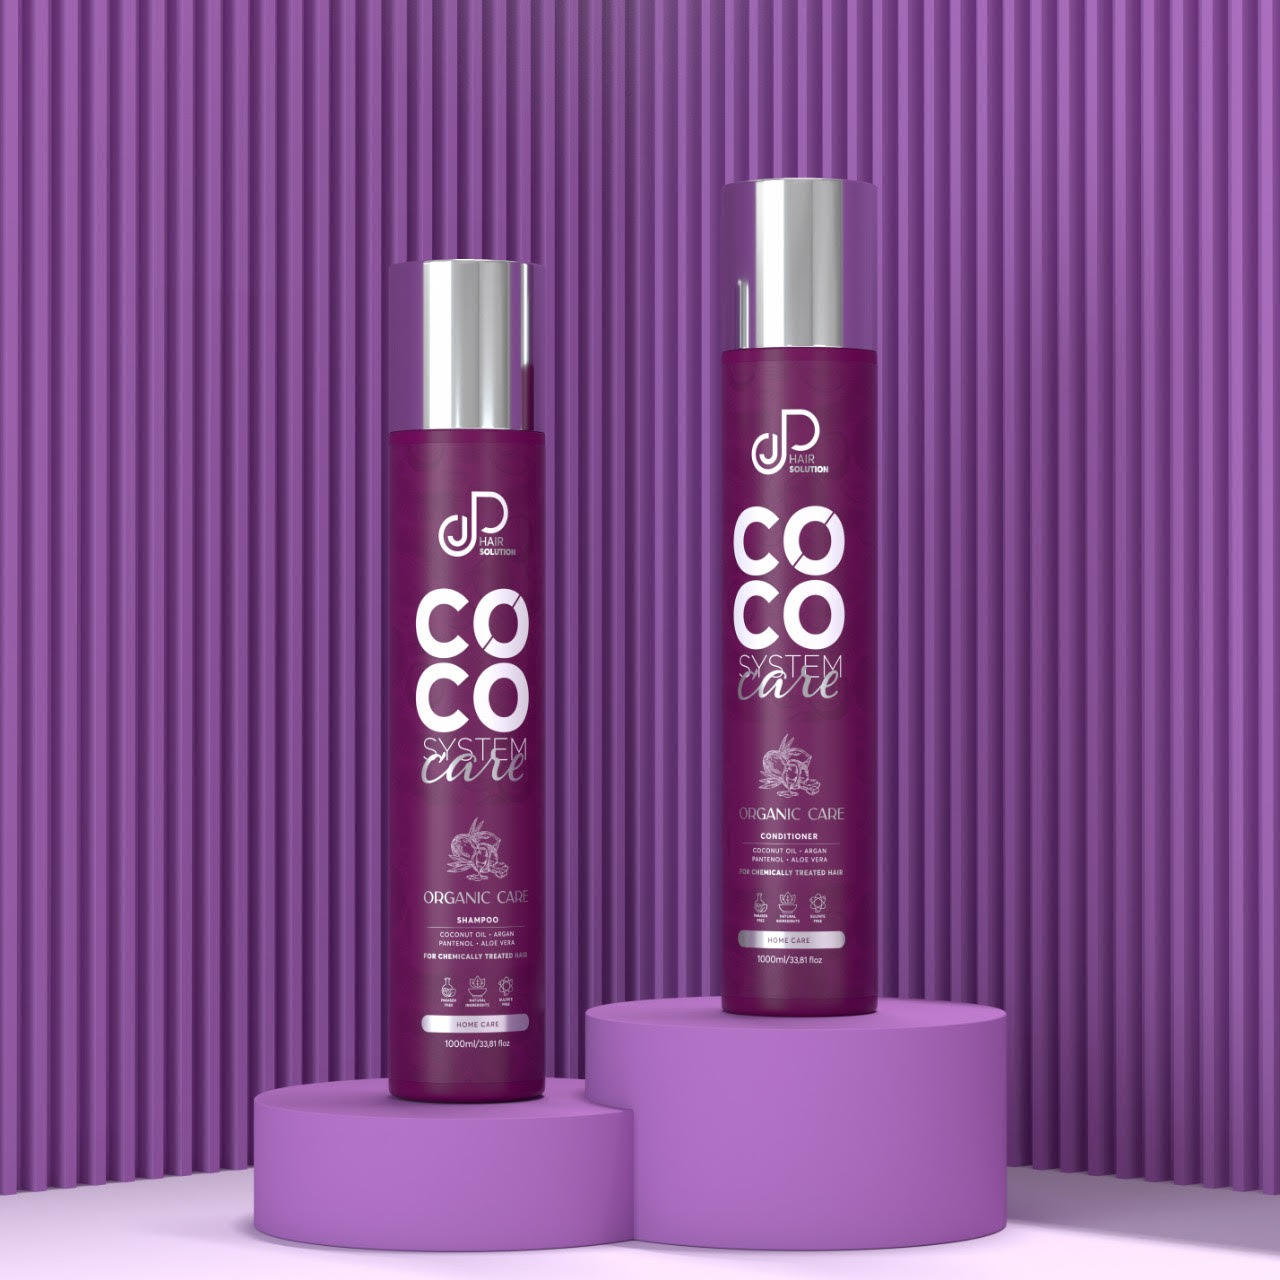 Coco System Shower Package 300ml